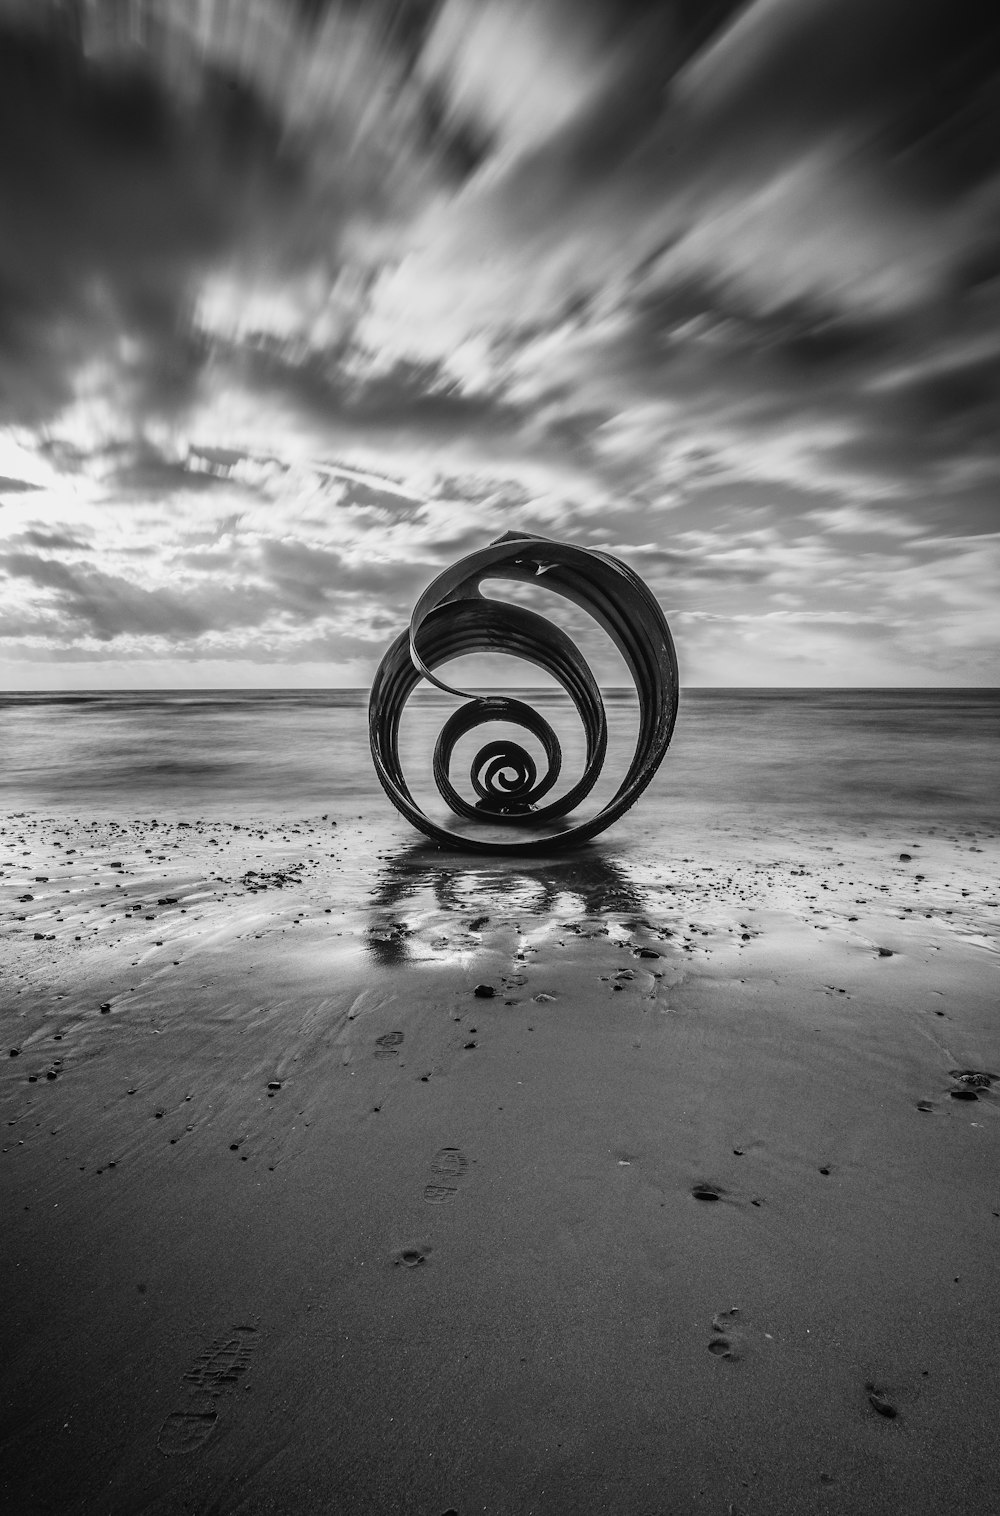 a black and white photo of a wheel on a beach